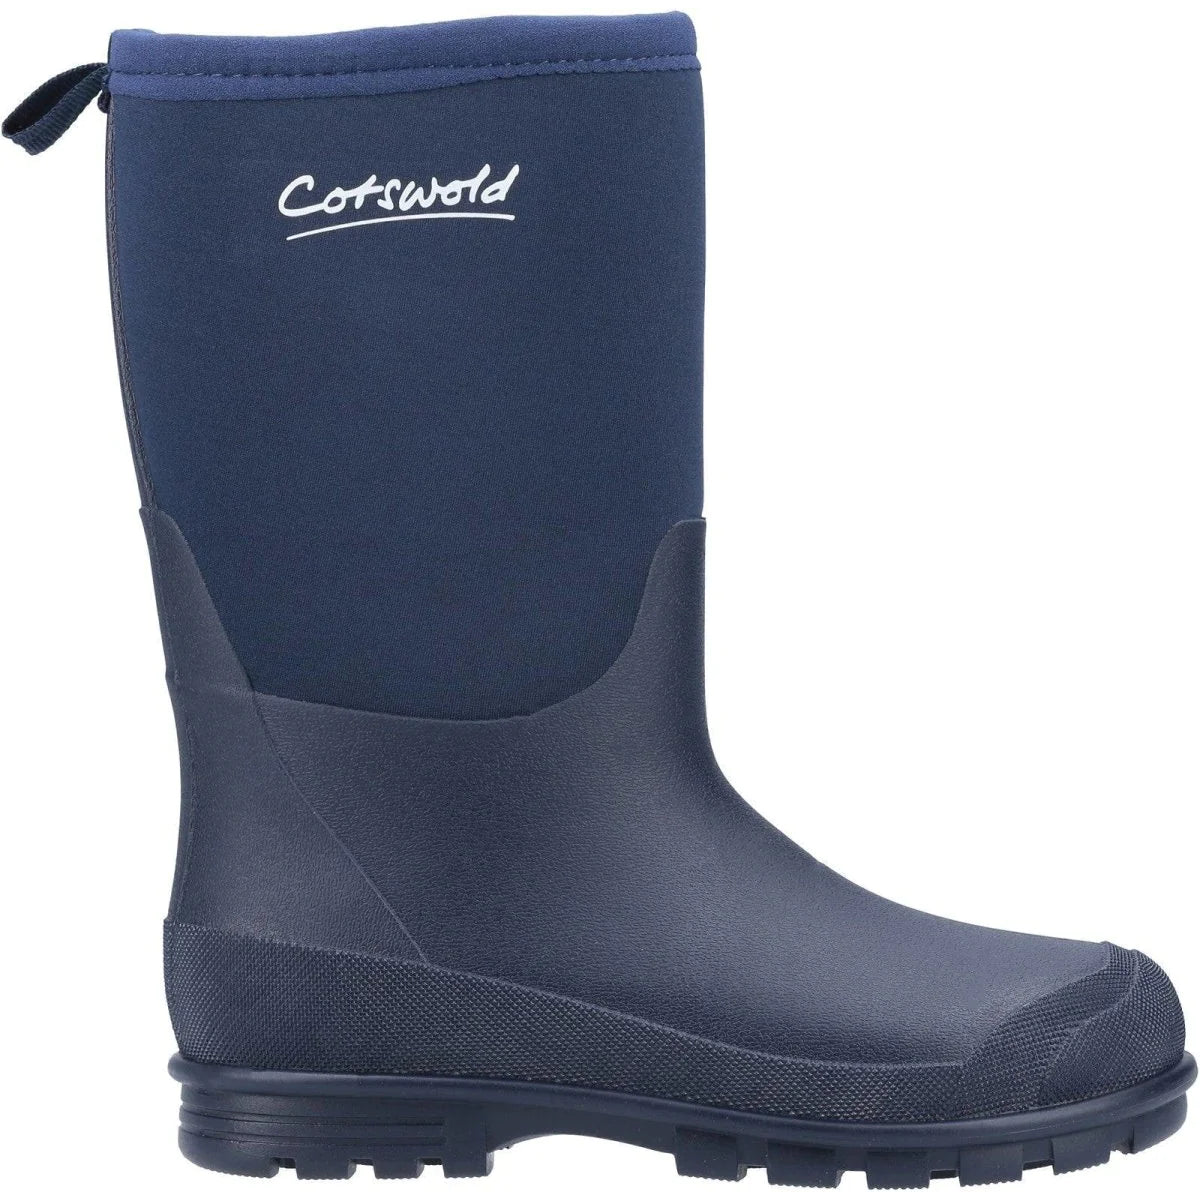 Cotswold Hilly Kids Neoprene Wellington Boots - Shoe Store Direct